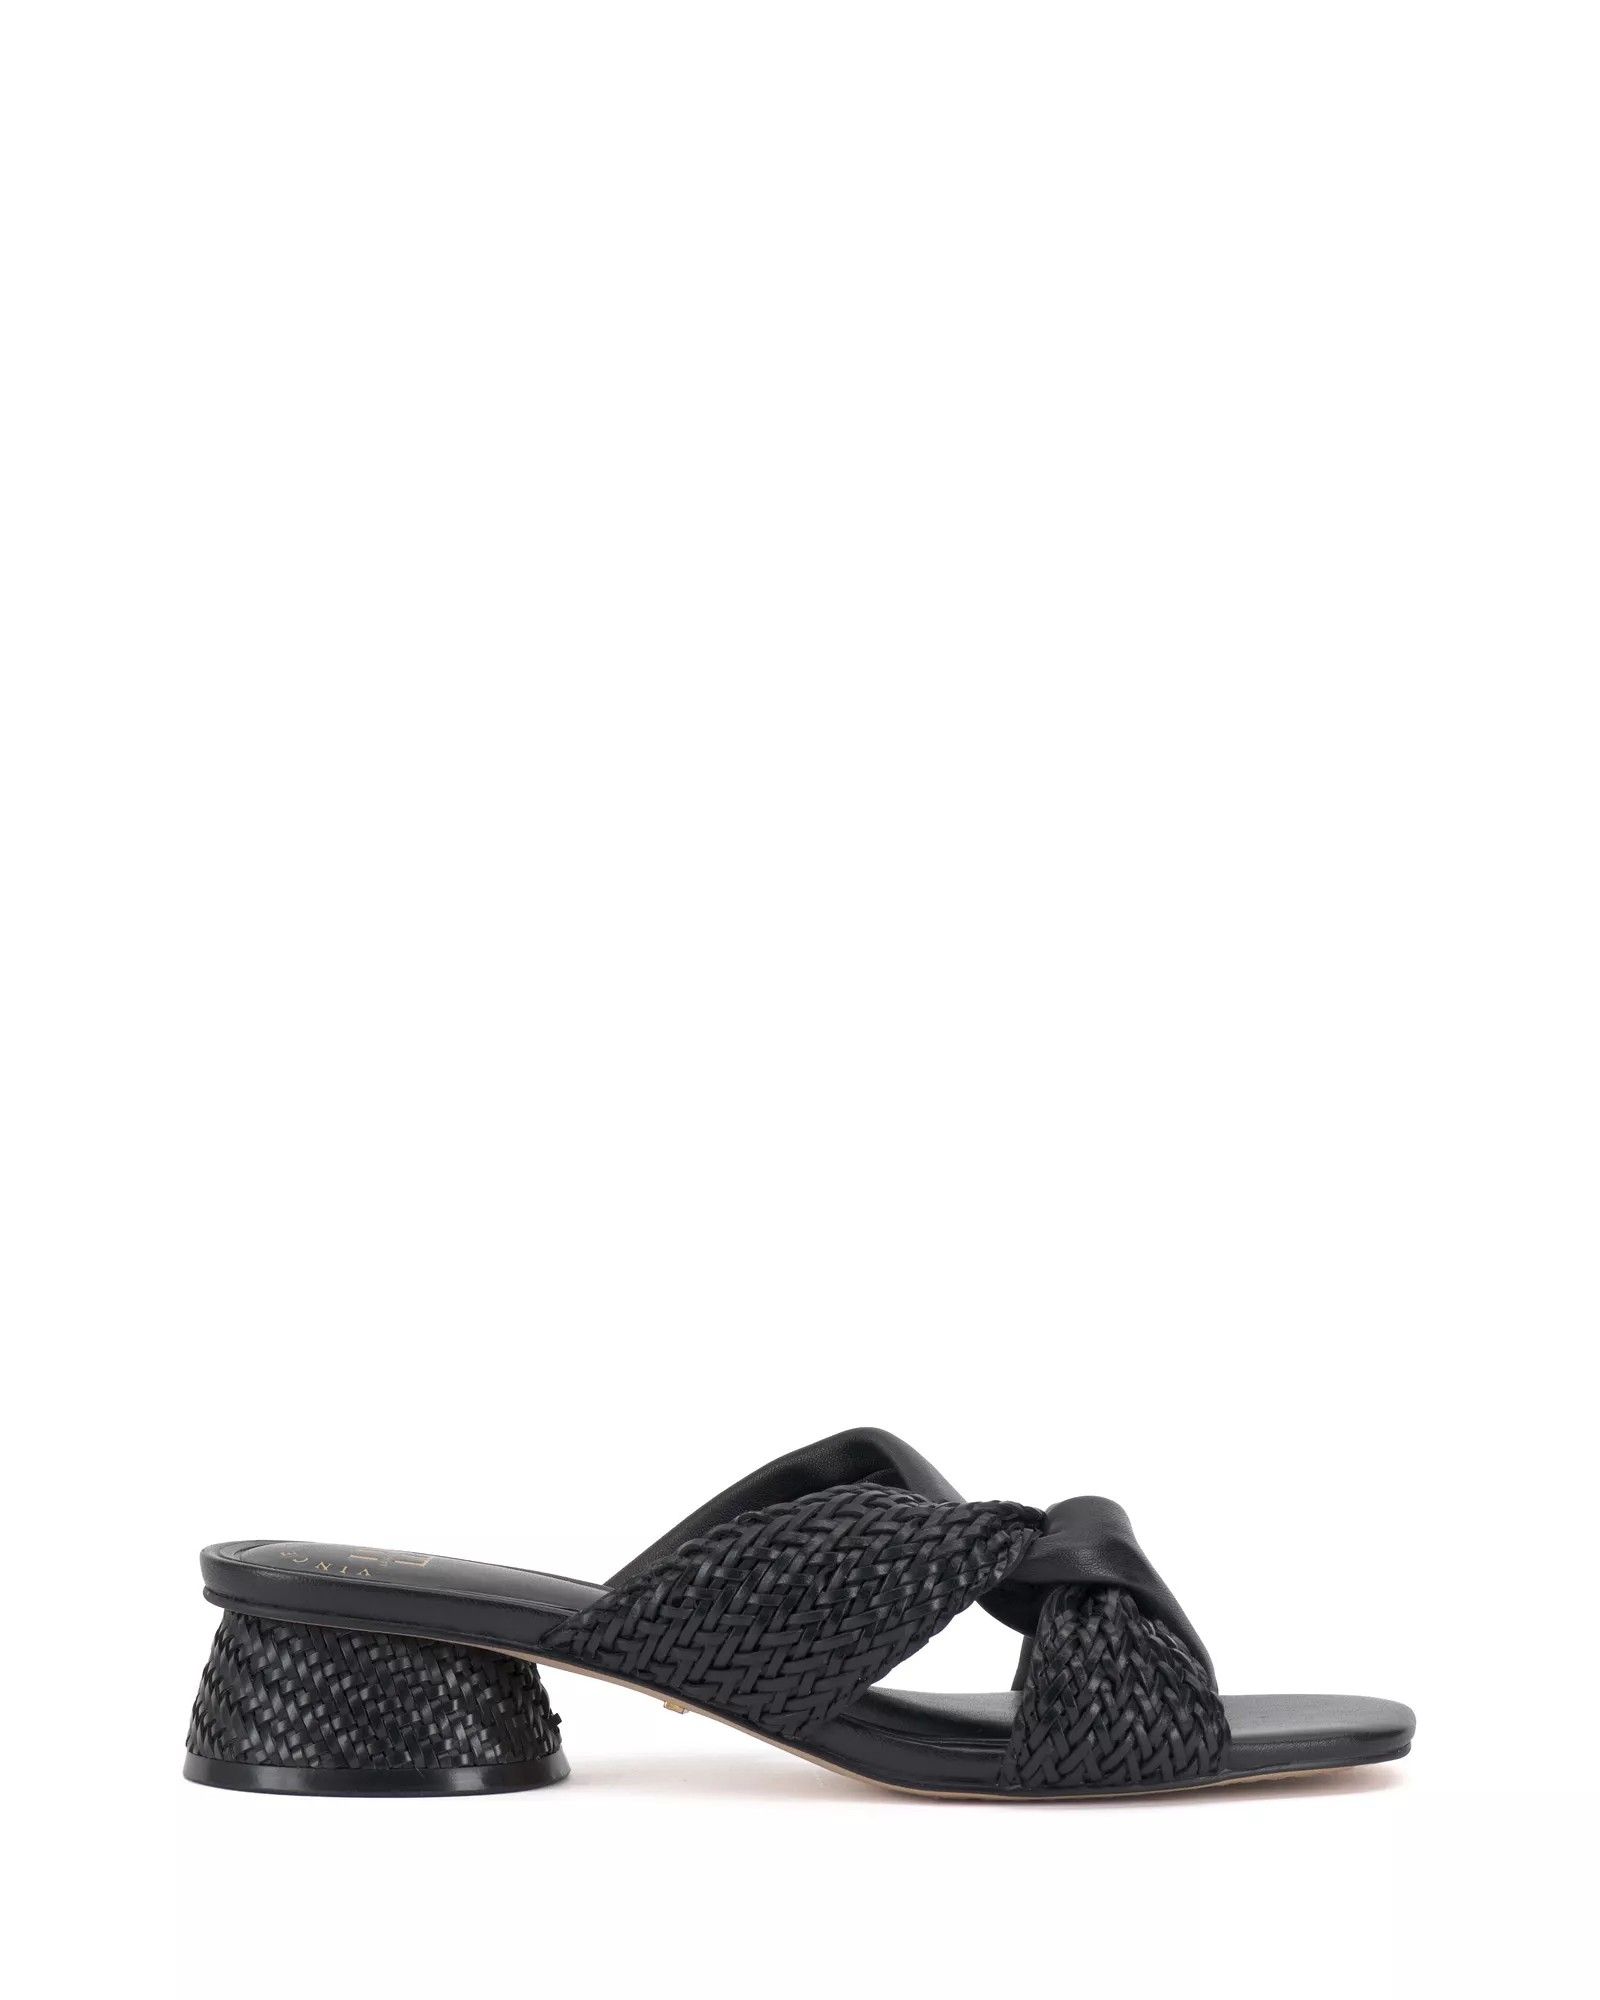 Vince Camuto x Laura Beverlin Willow Sandal | Vince Camuto